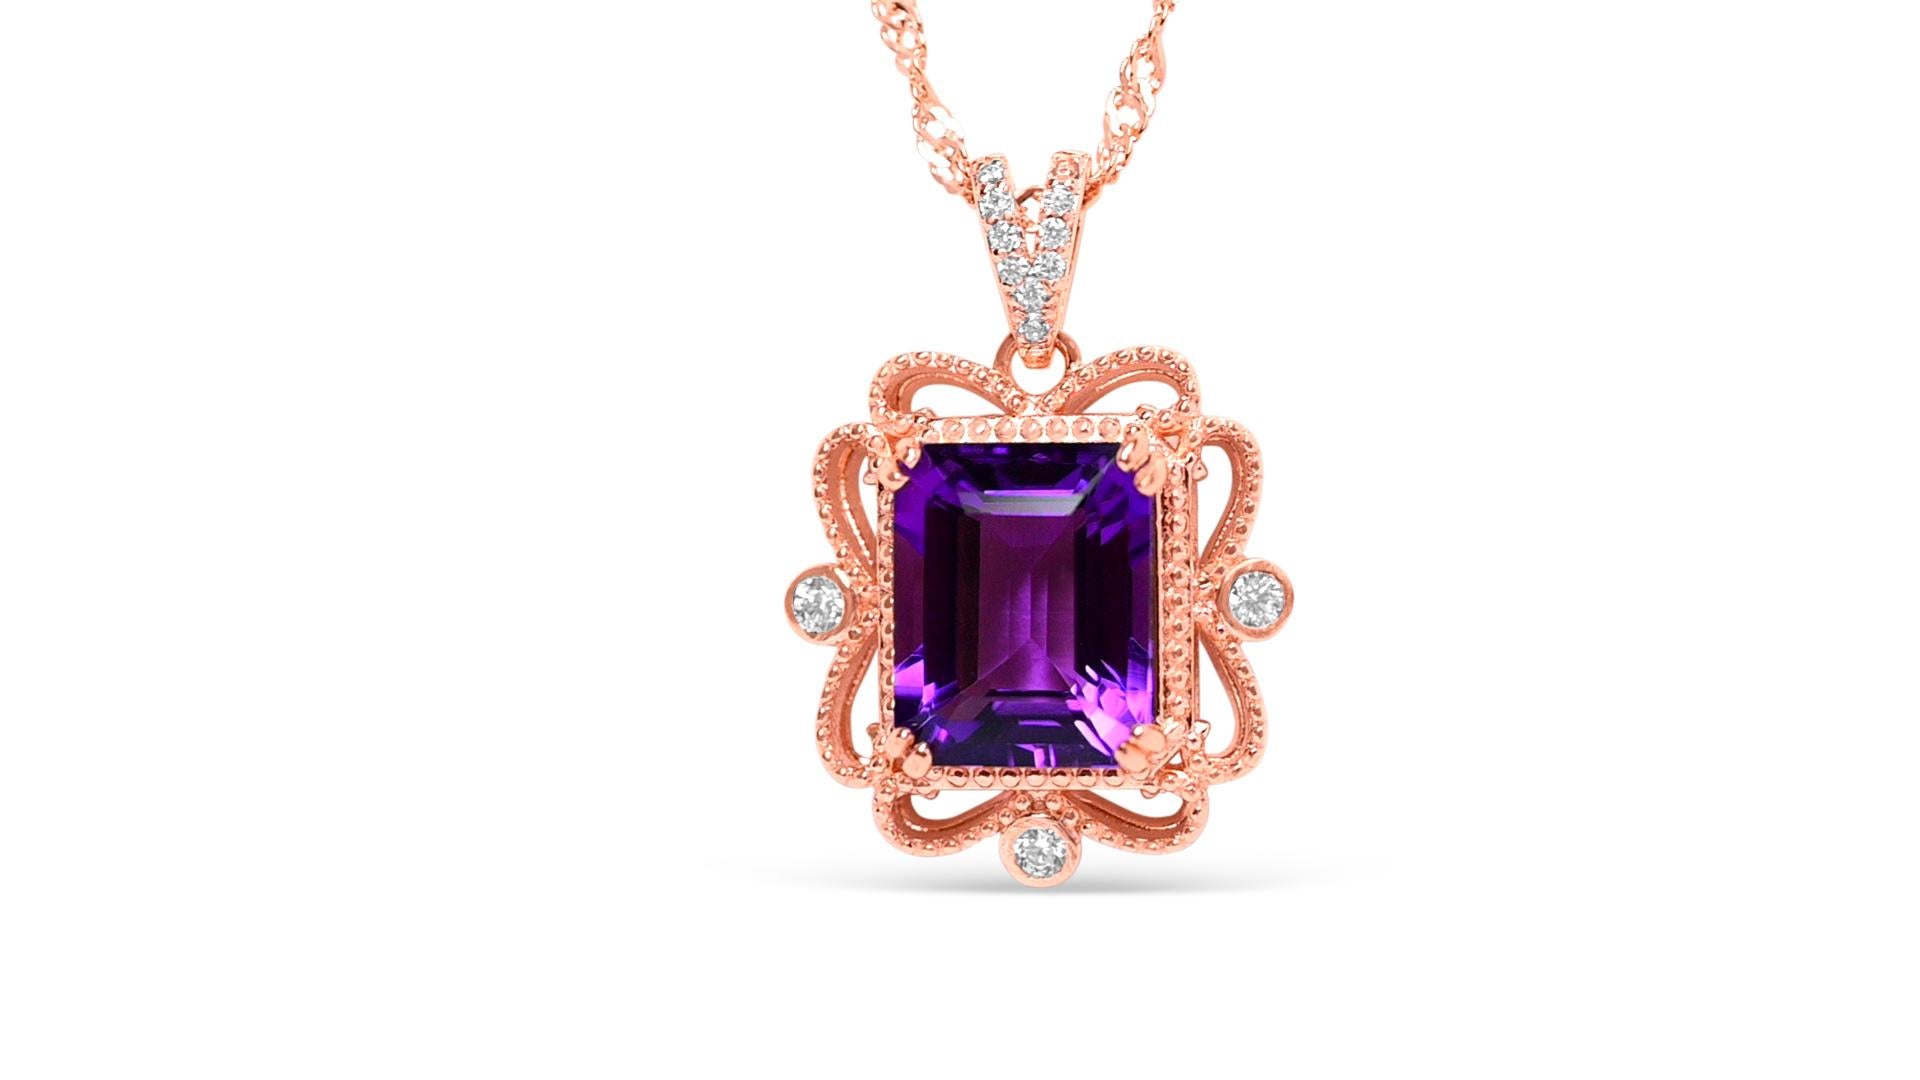 Women's Woman Wedding Amethyst Pendant Necklace 4.33 ct 18K Rose Gold Sterling Silver  For Sale